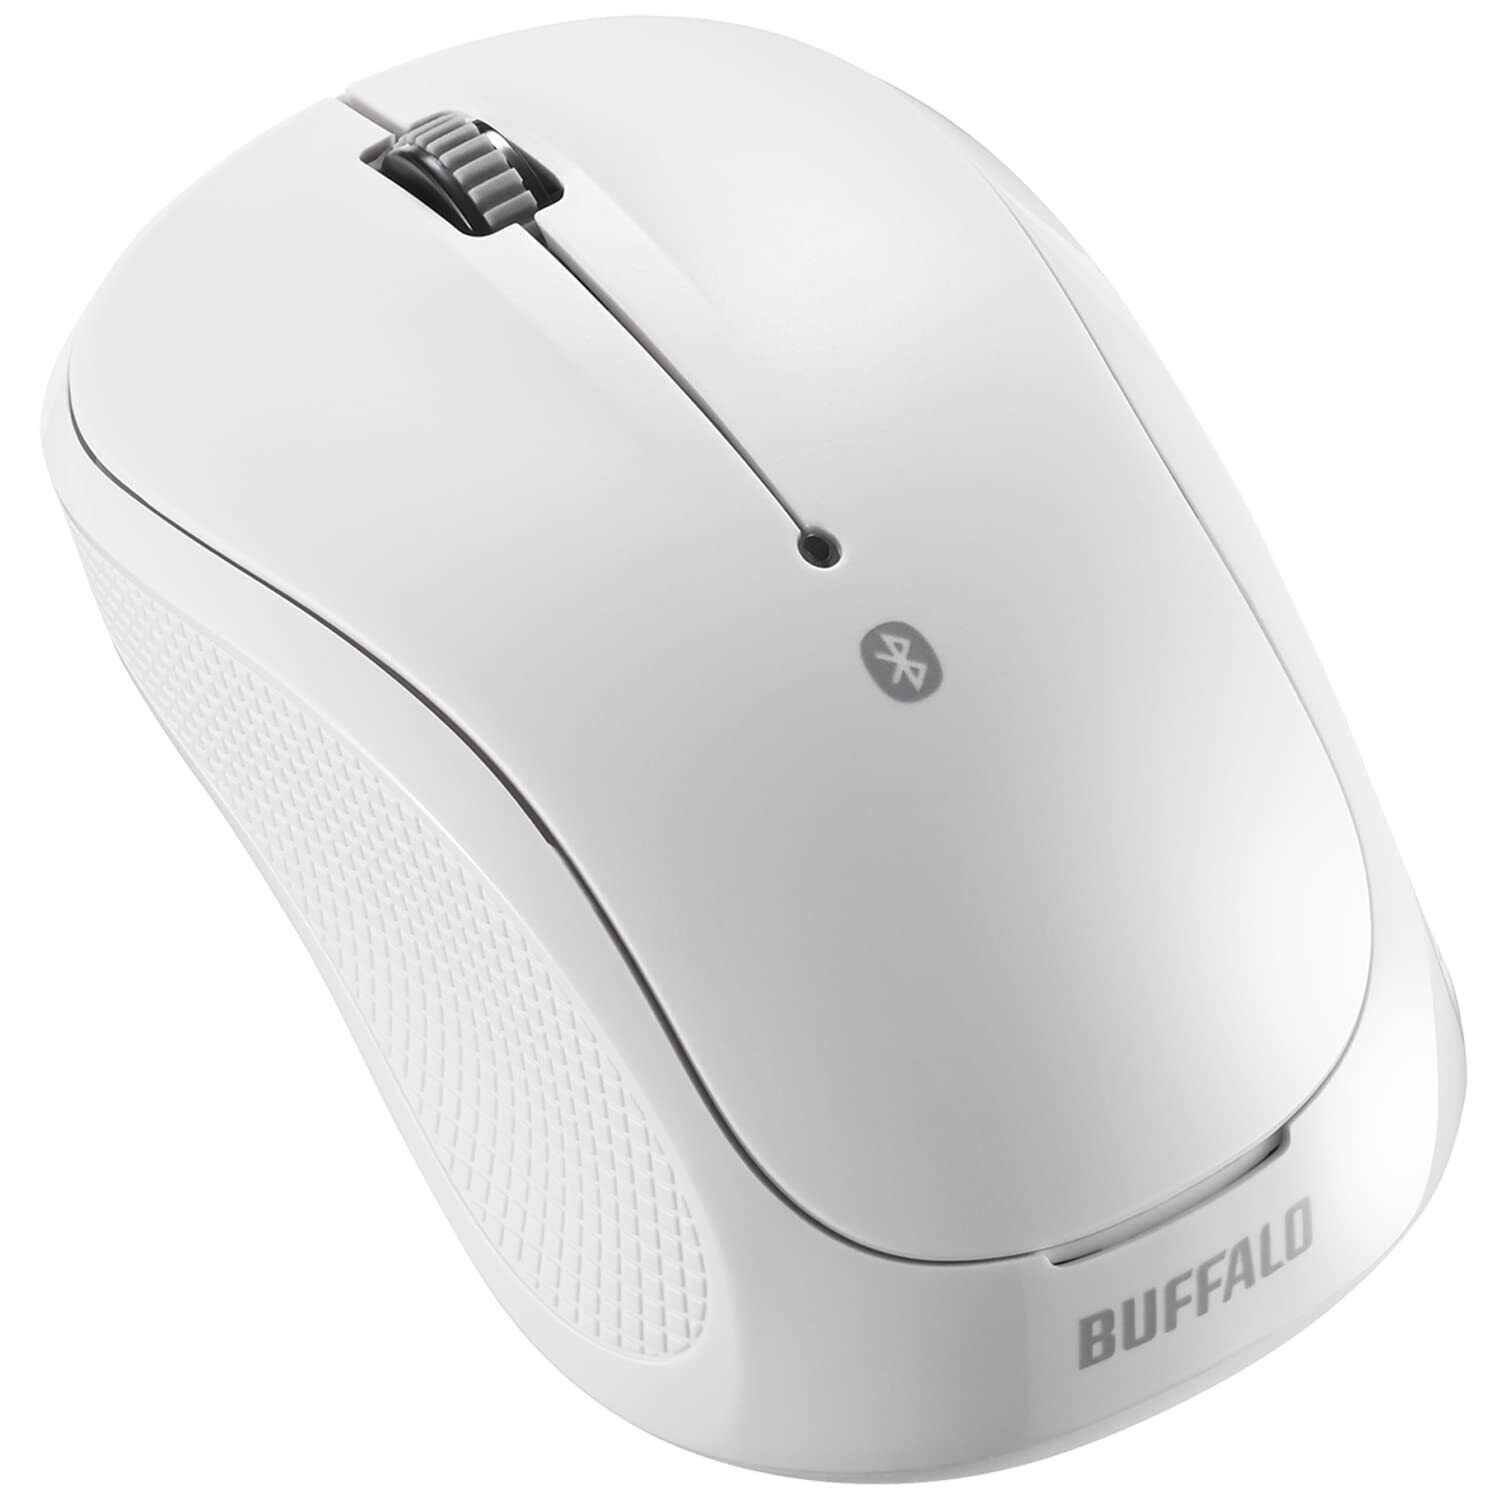 Bluetooth IR LED 3Button Mouse white Compatible with Windows/Mac/Chrome/Android/